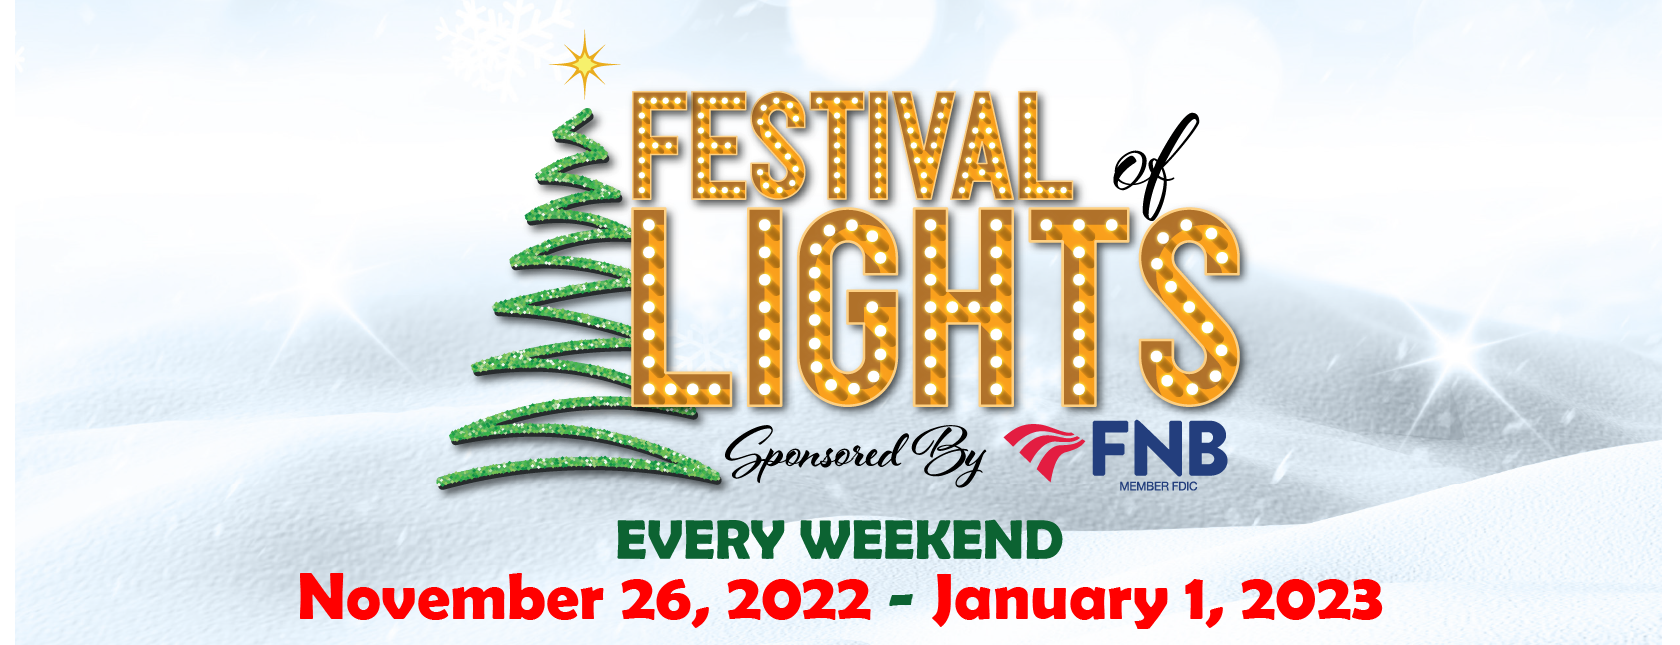 Festival of Lights in Mayfield every weekend from Saturday, November 26th through Sunday, January 1st